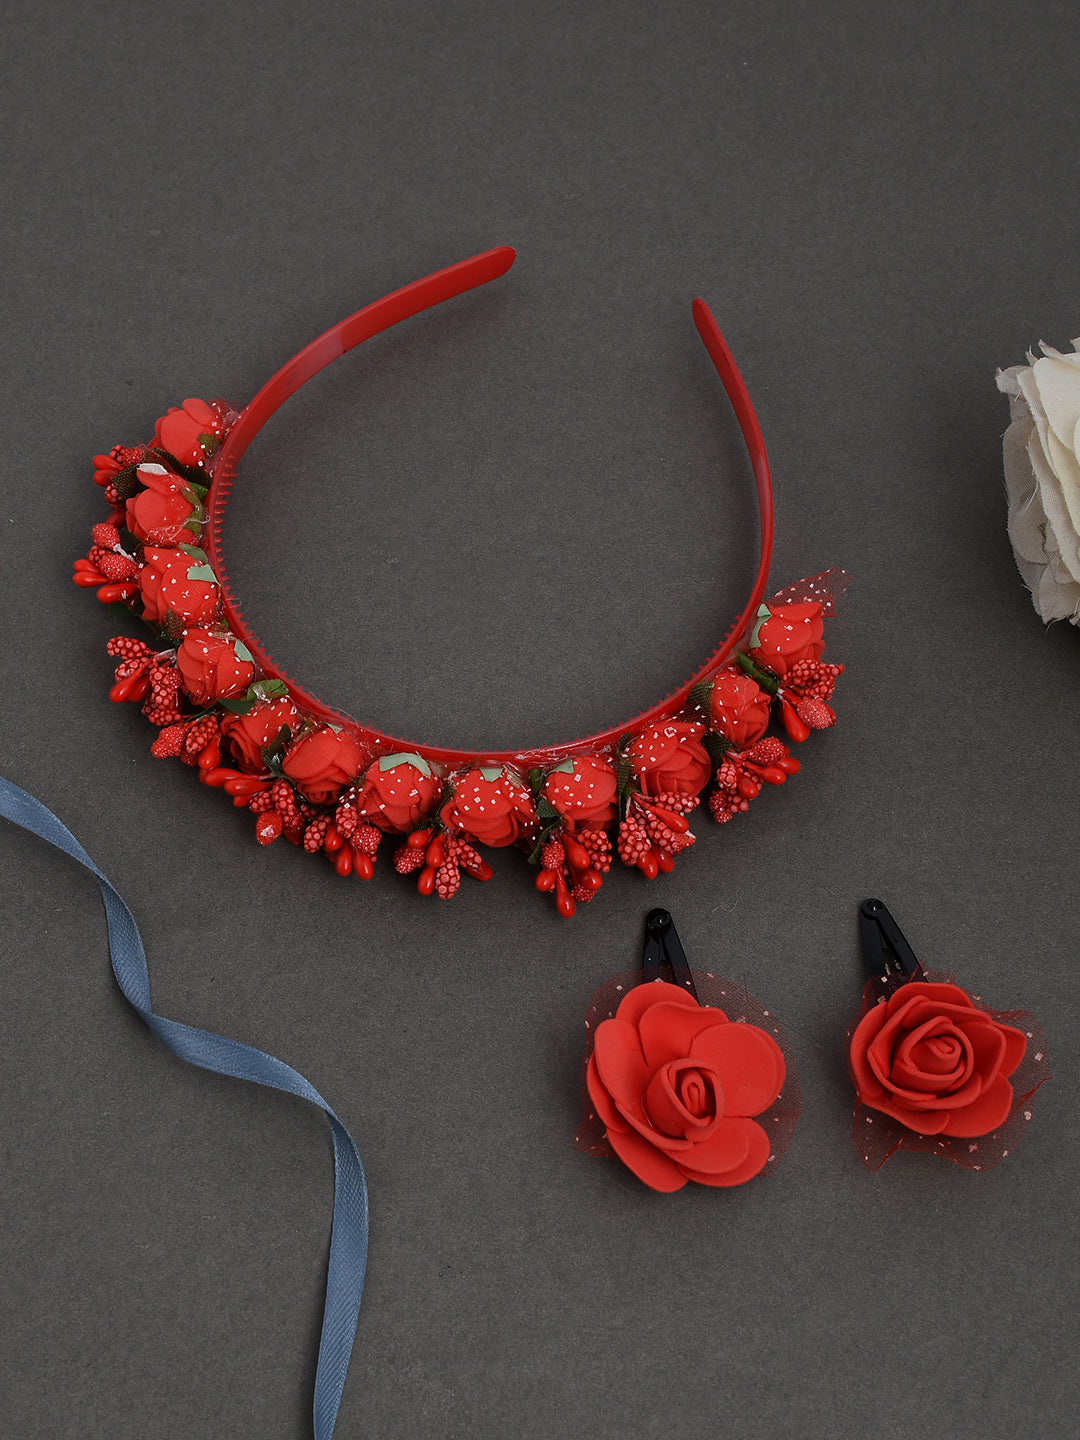 Red Floral Tiara Hairband With Floral Tictac Hair Cilps for Women Online